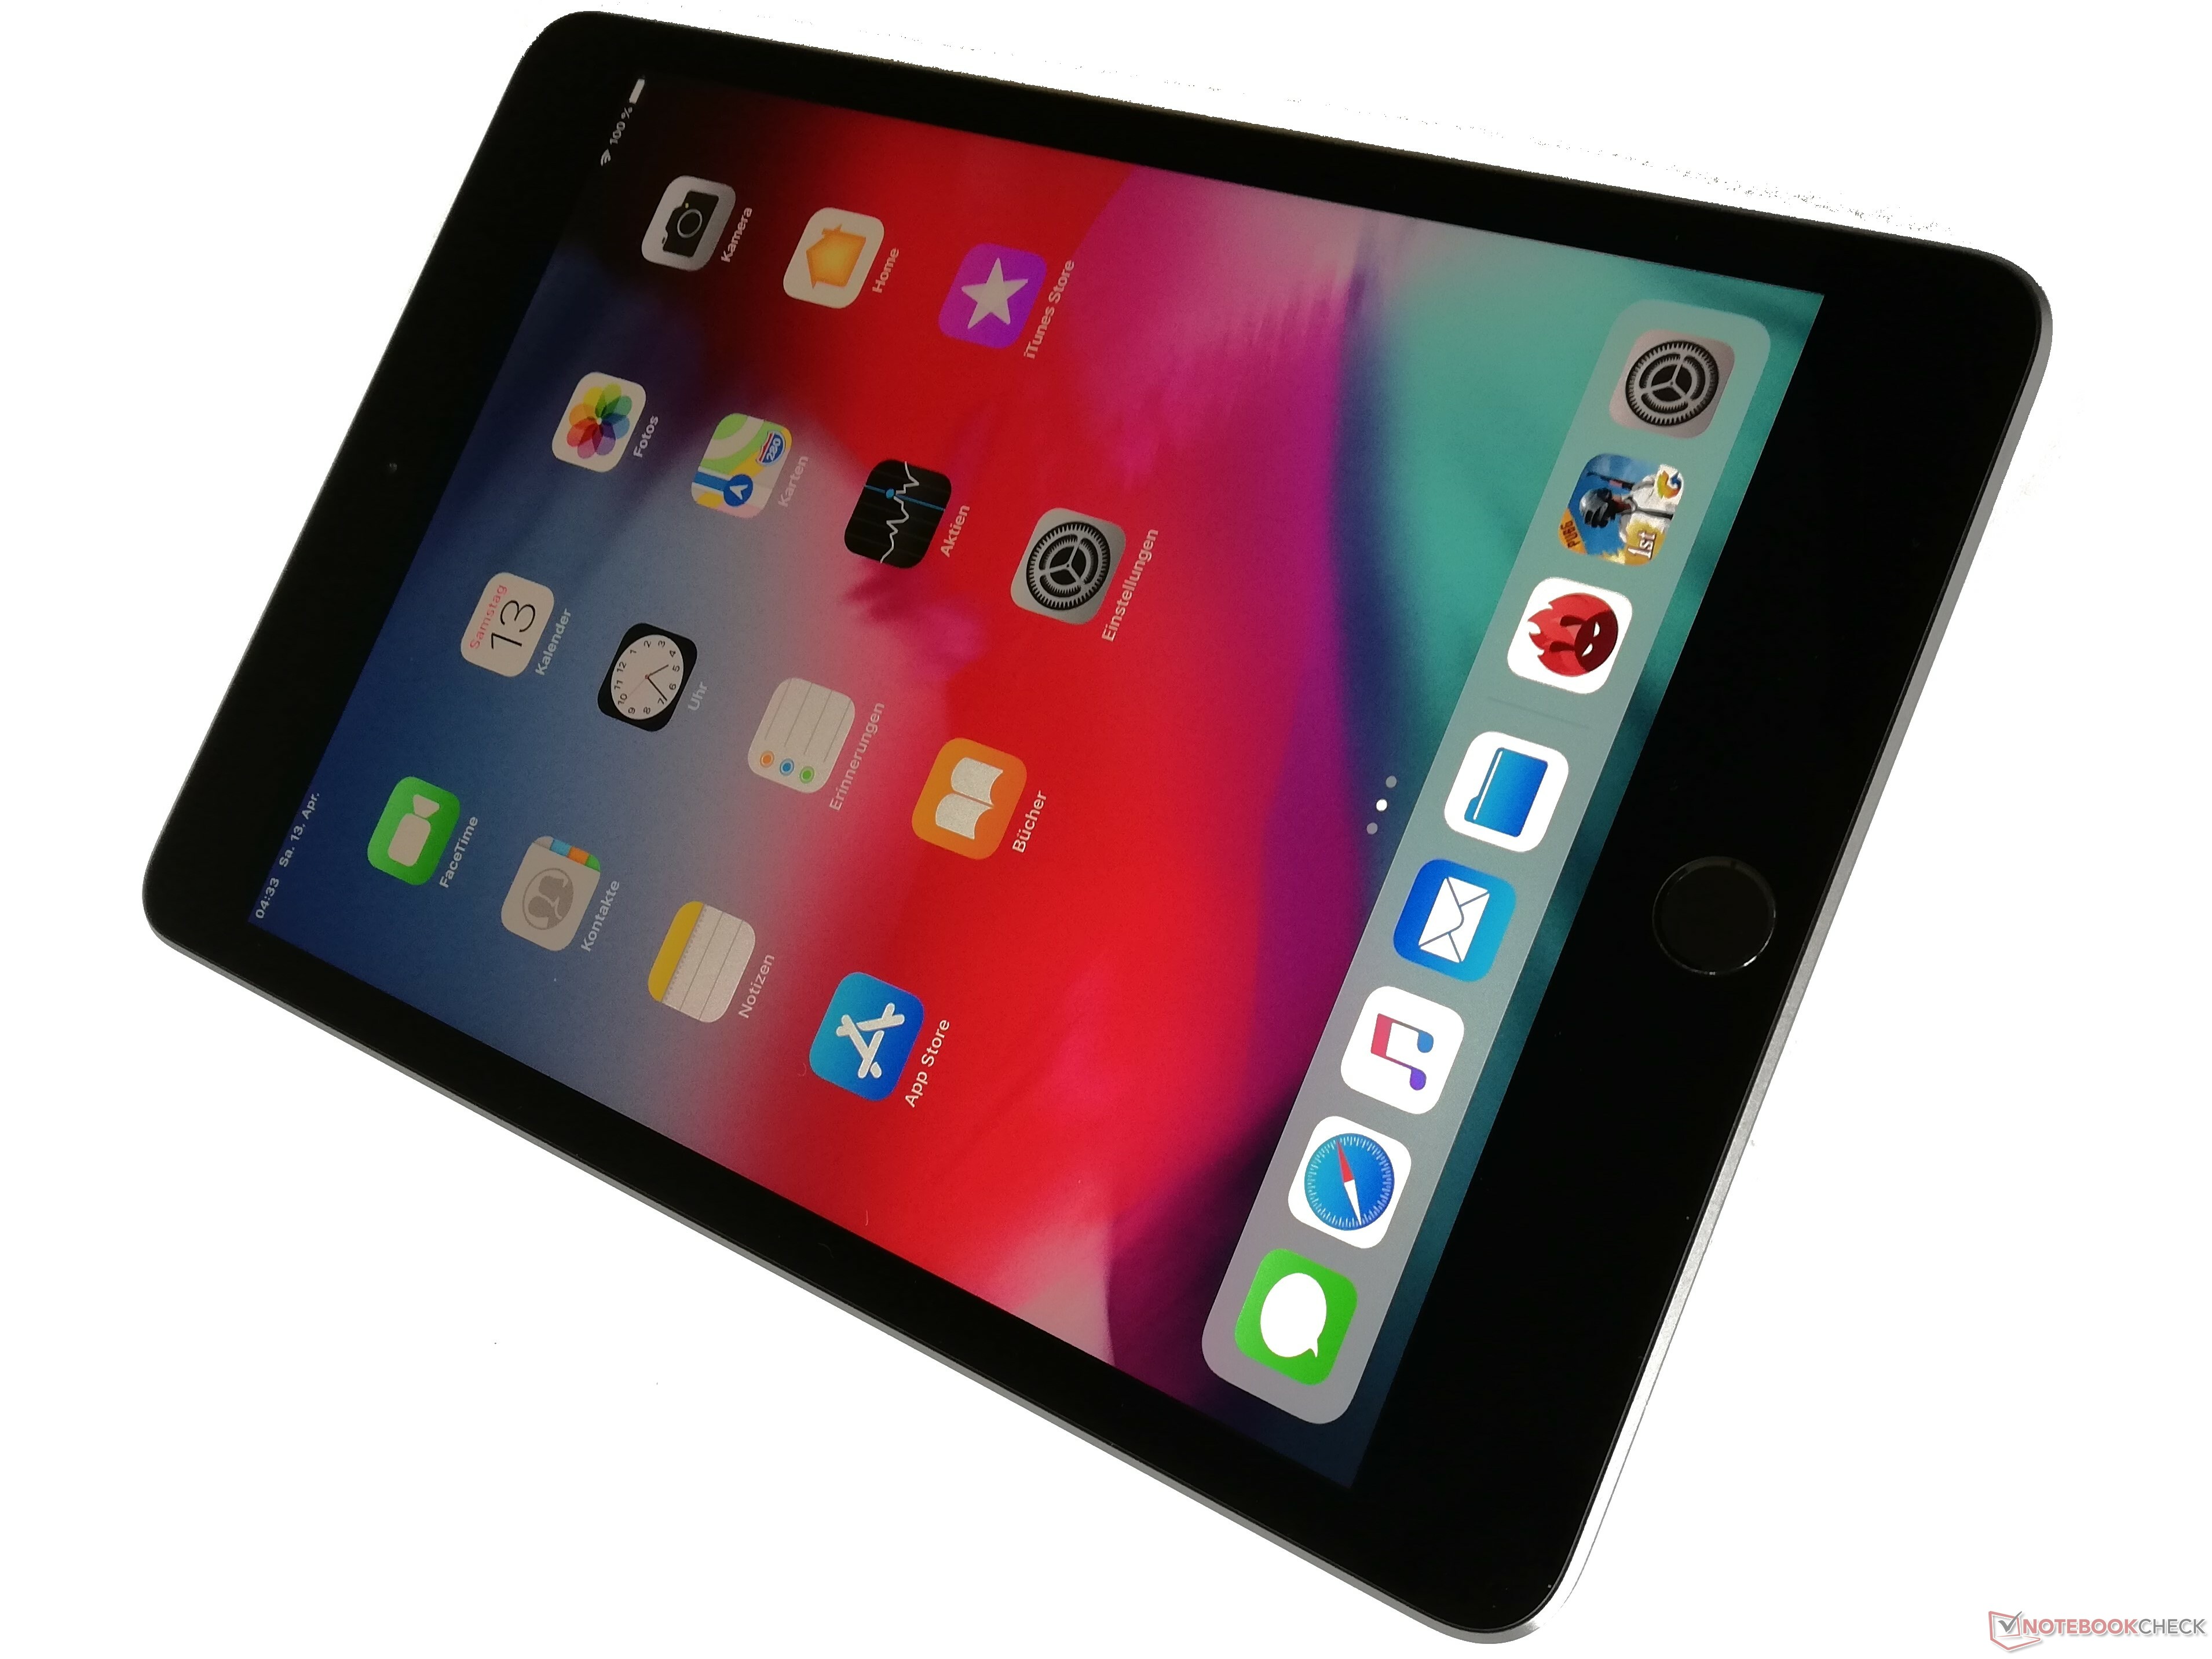  Apple iPad mini 5 Tablet Review NotebookCheck net Reviews